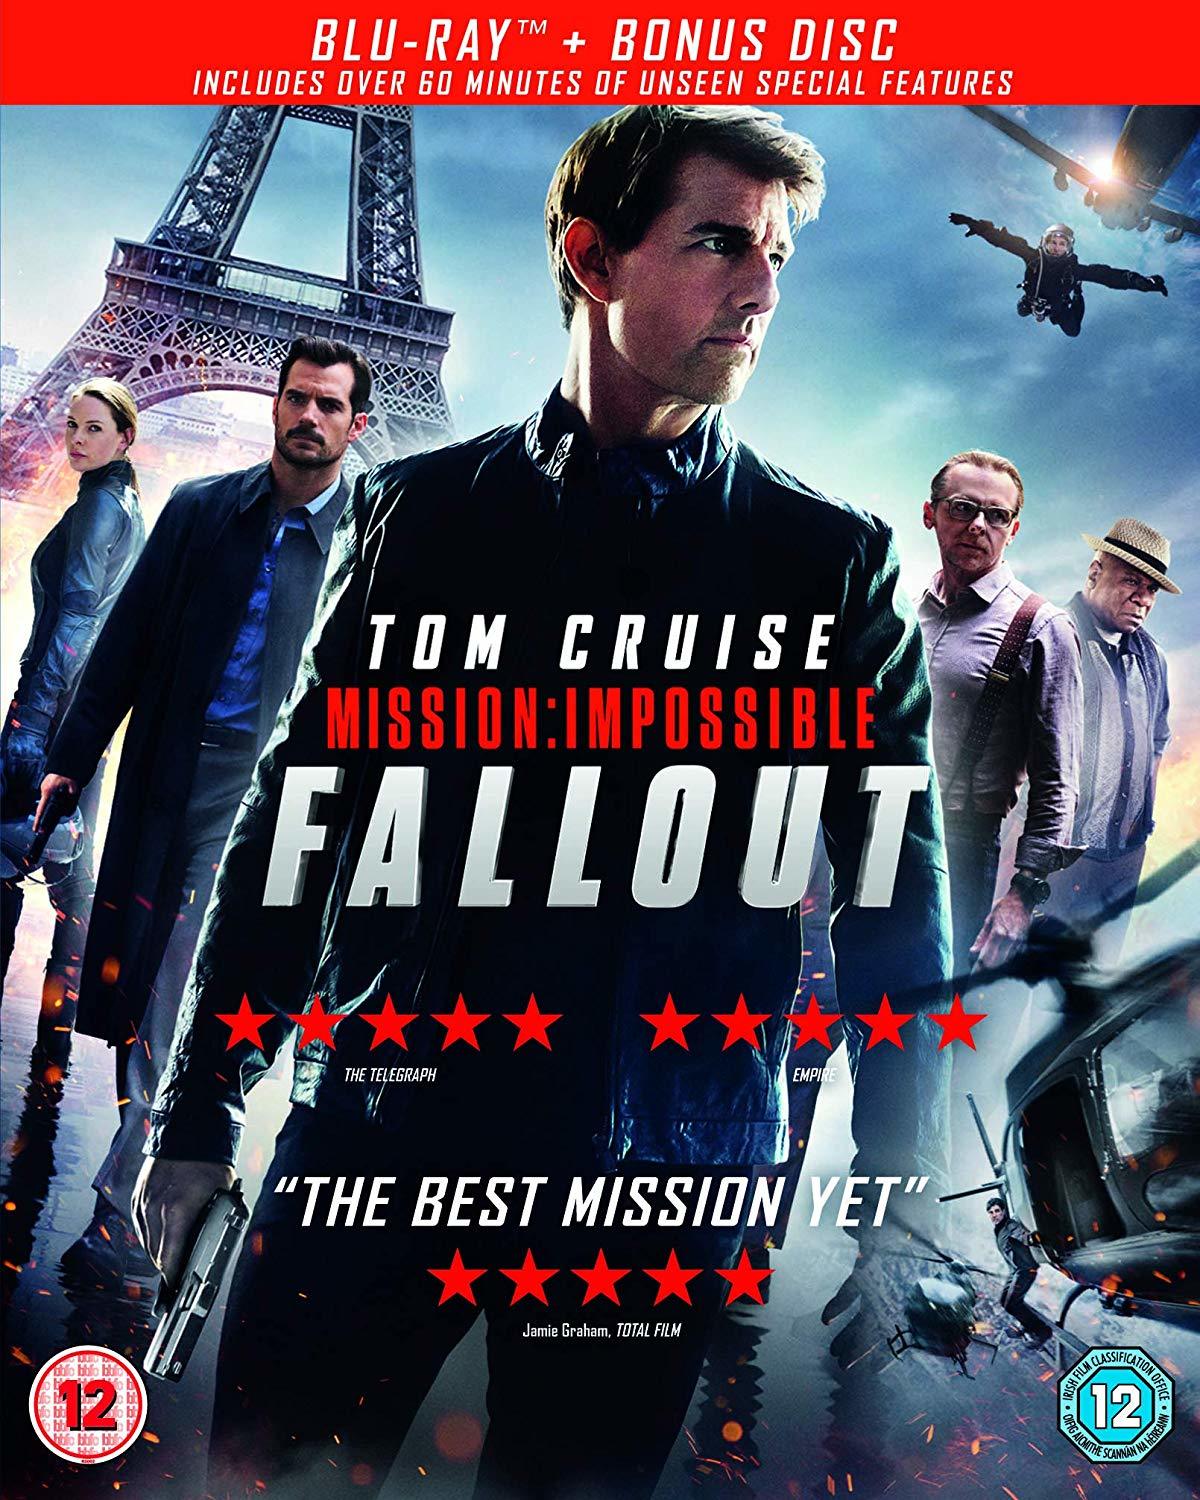 Mission: Impossible - Fallout (2018) Misión Imposible: Fallout (2018) [AC3 5.1 + SUP] [Blu Ray-Rip] 210989_front